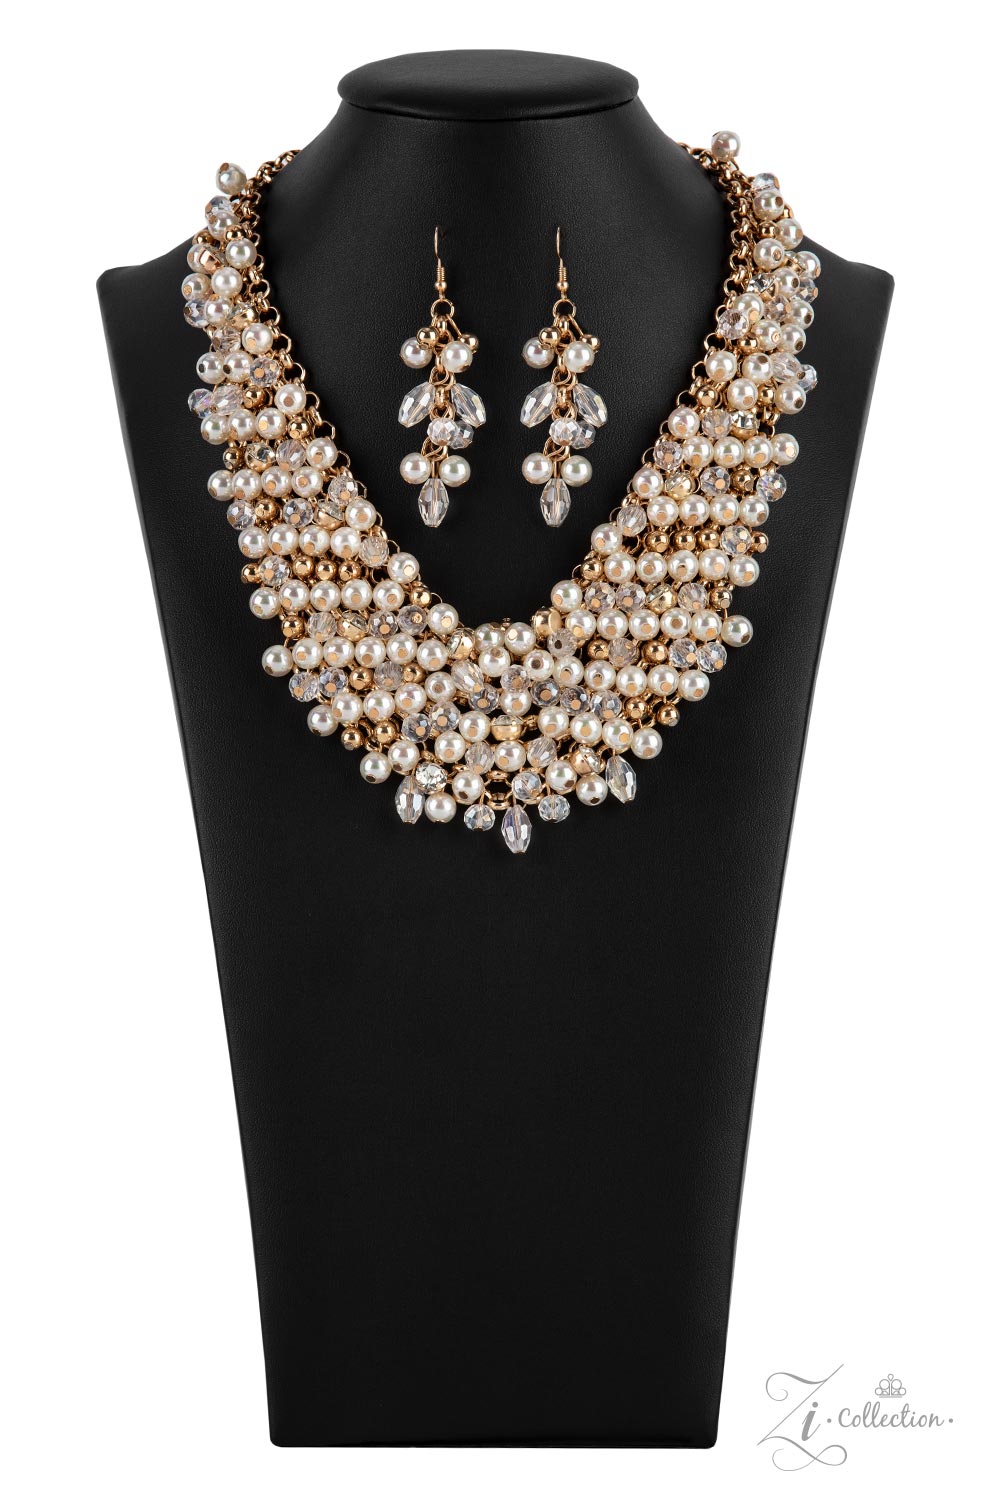 Paparazzi Sentimental - Necklace & Earrings - Zi Collection 2021